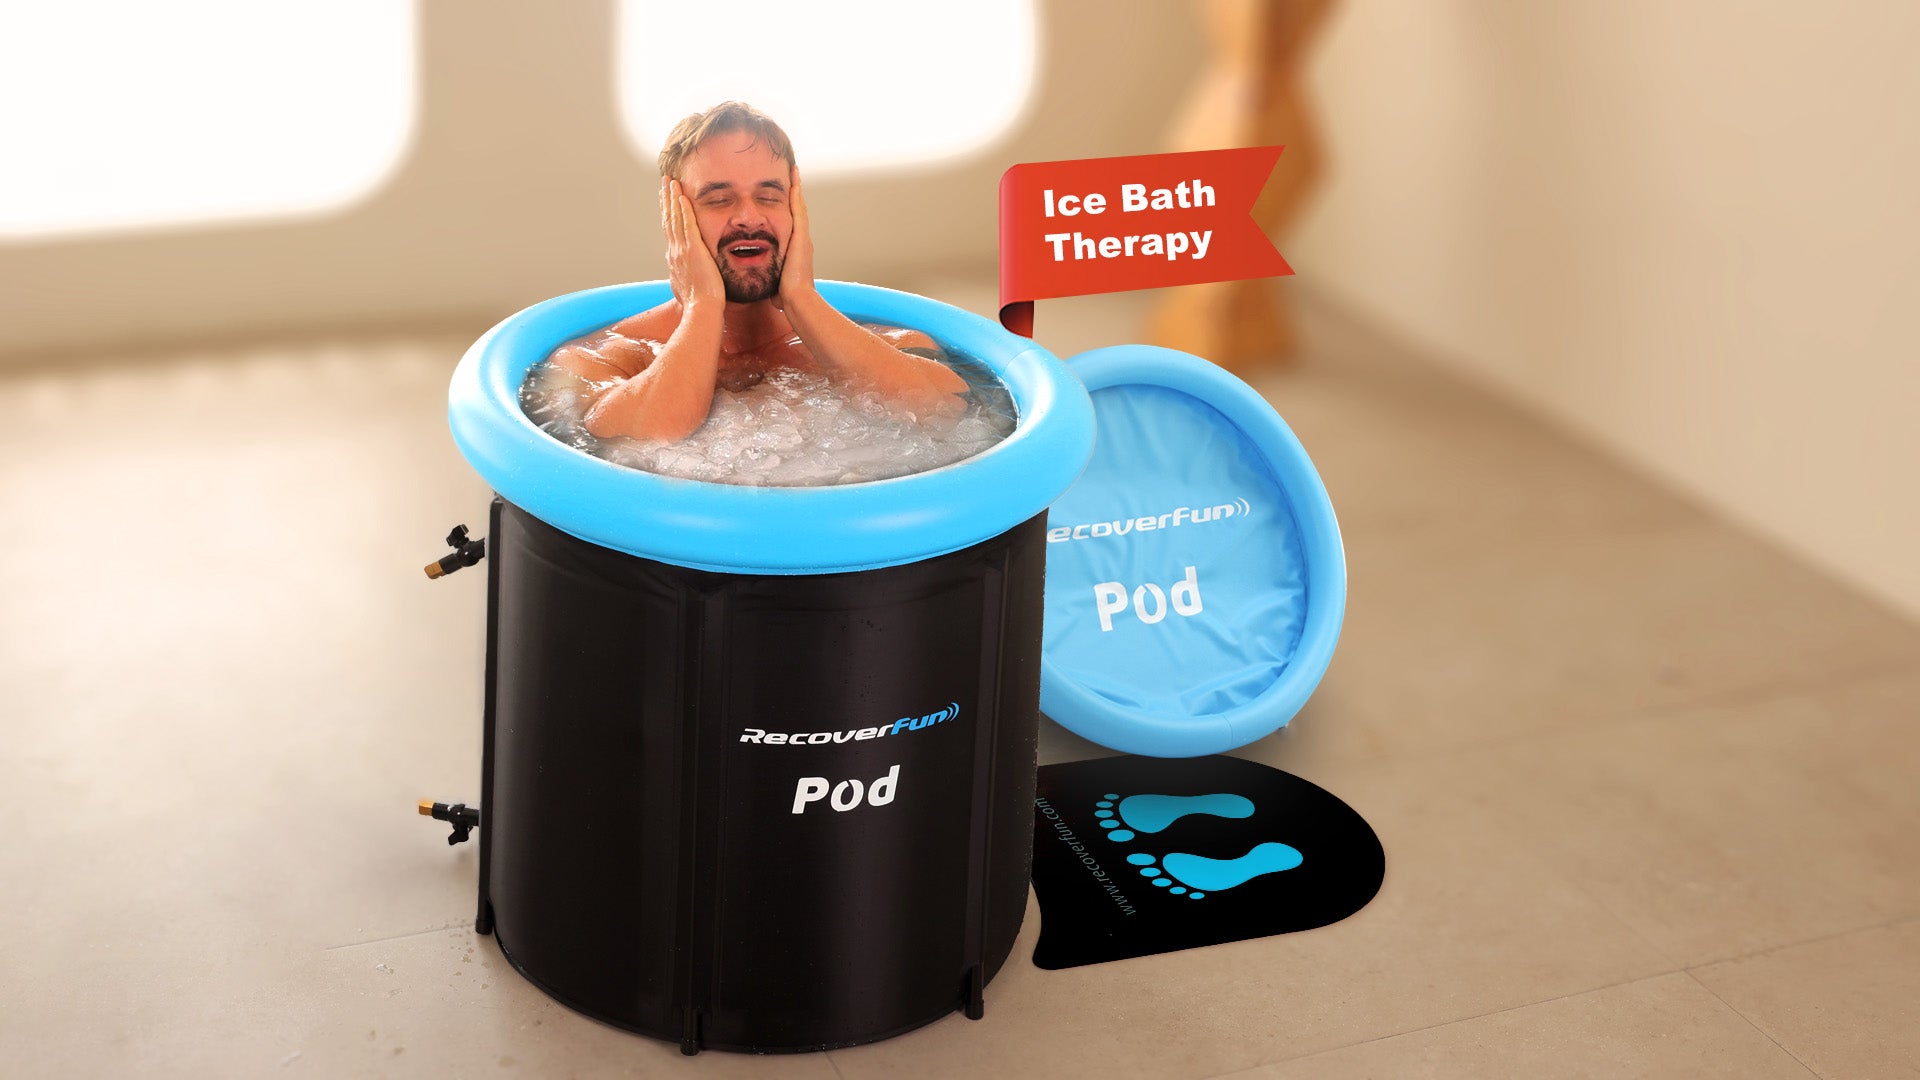 Load video: ice bath therapy at home